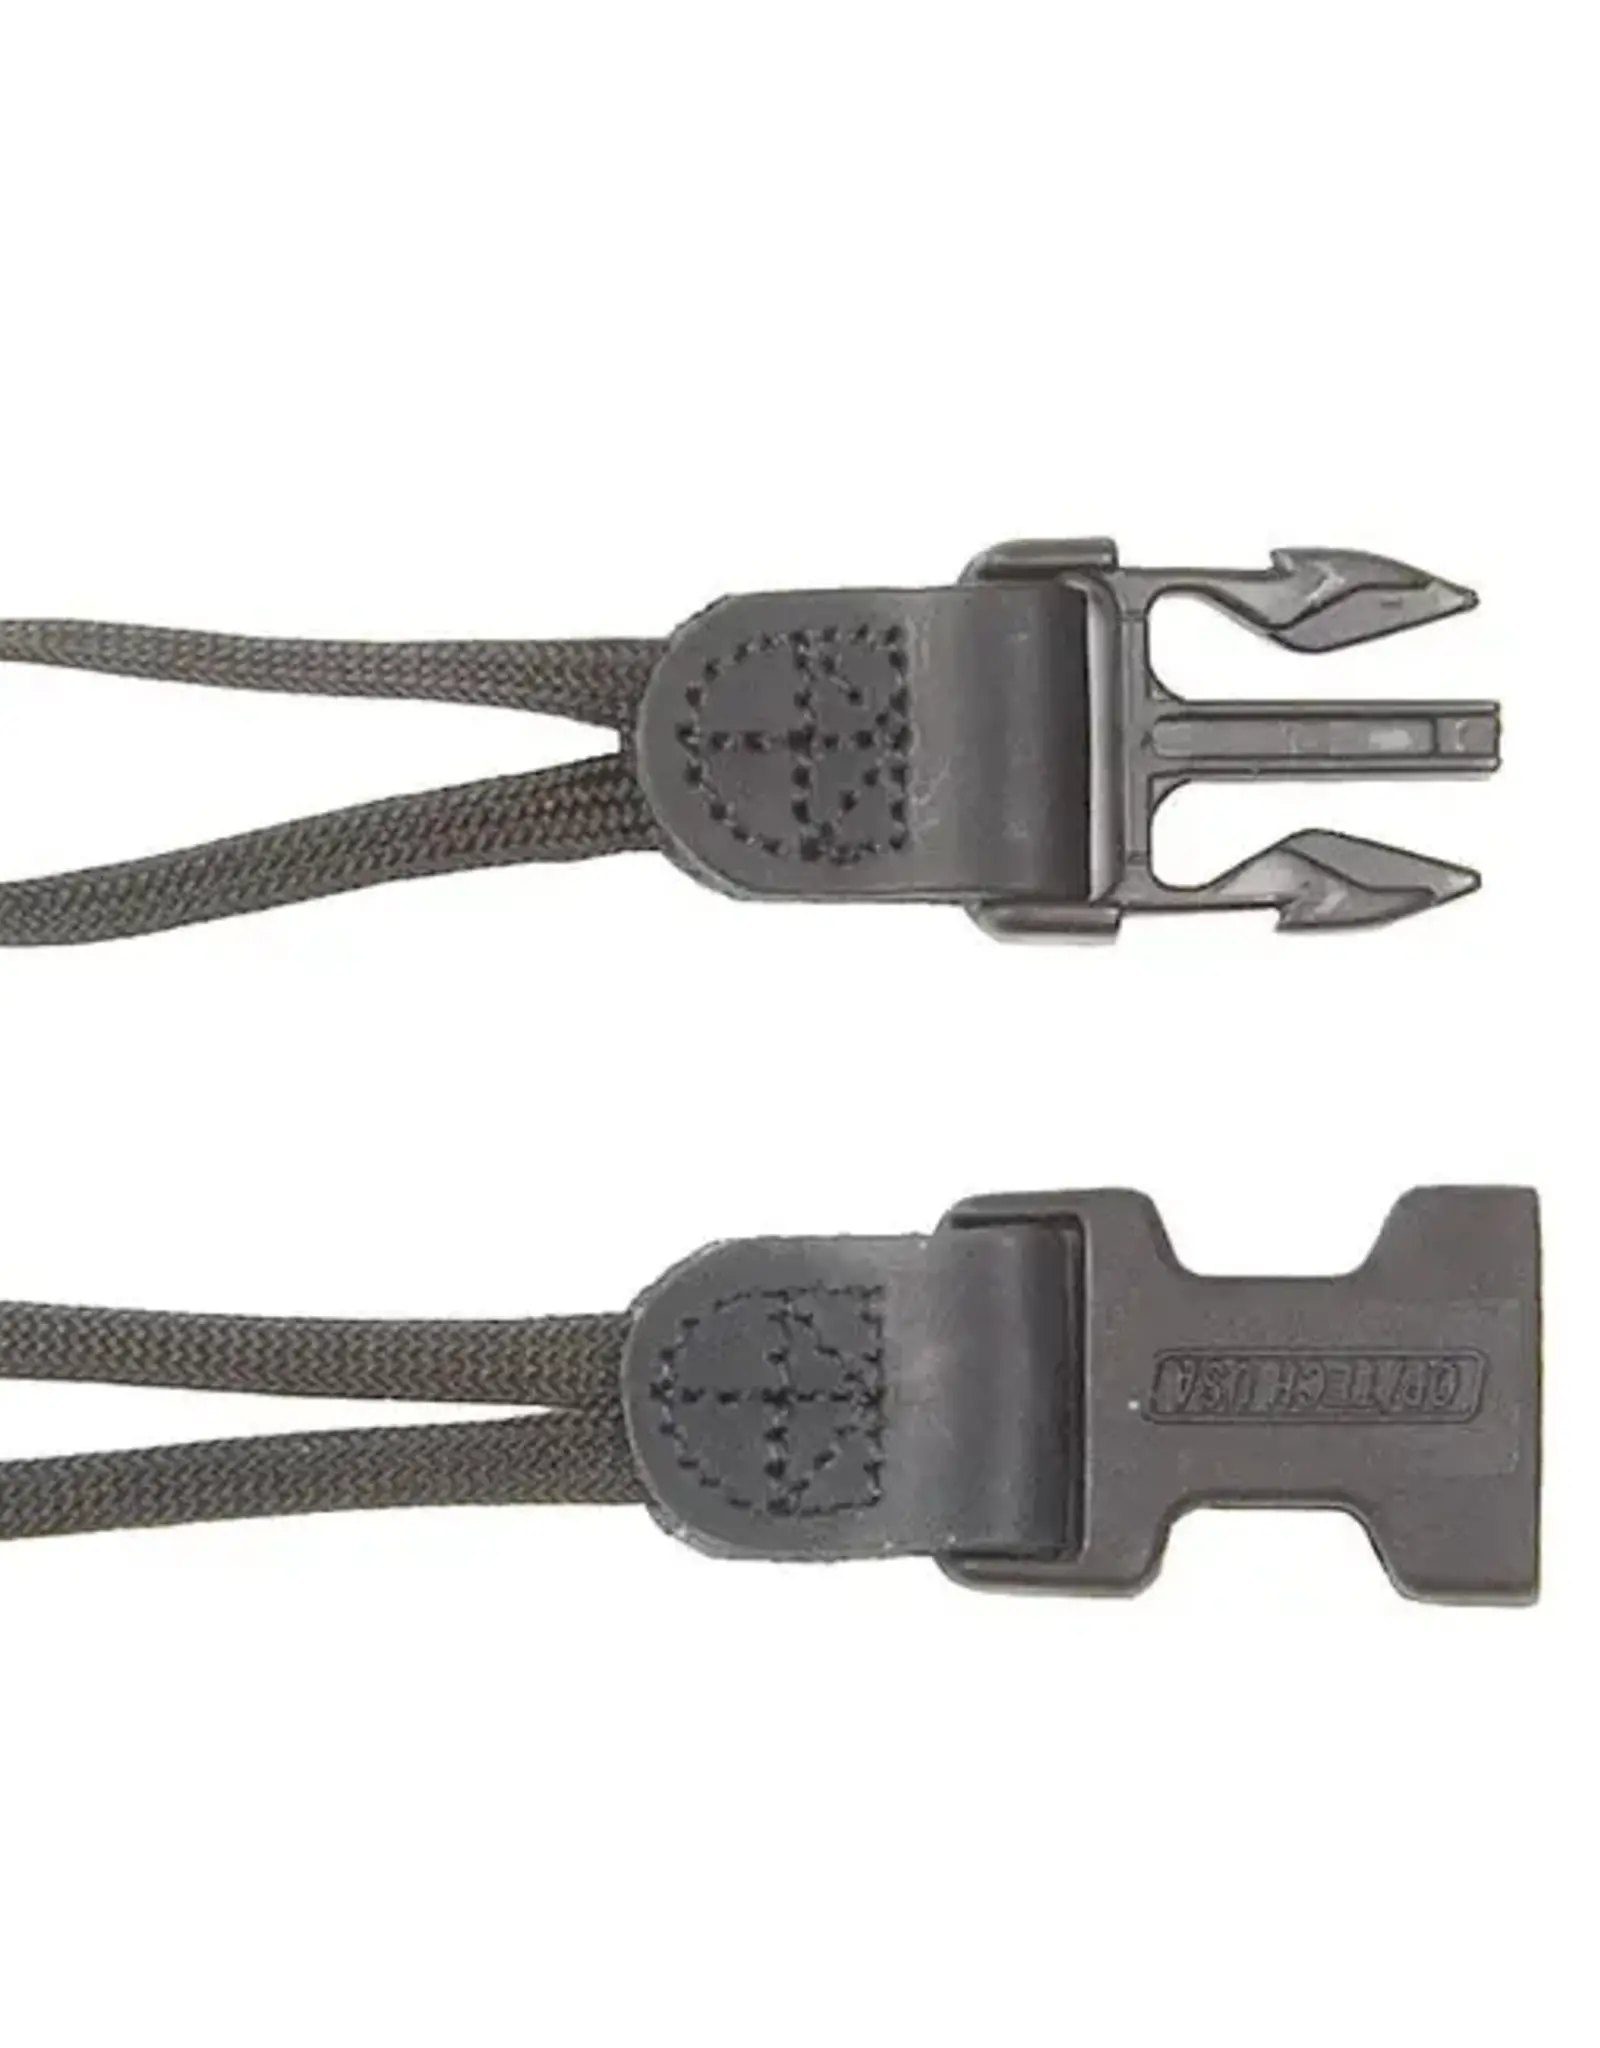 Harness - Double Sling